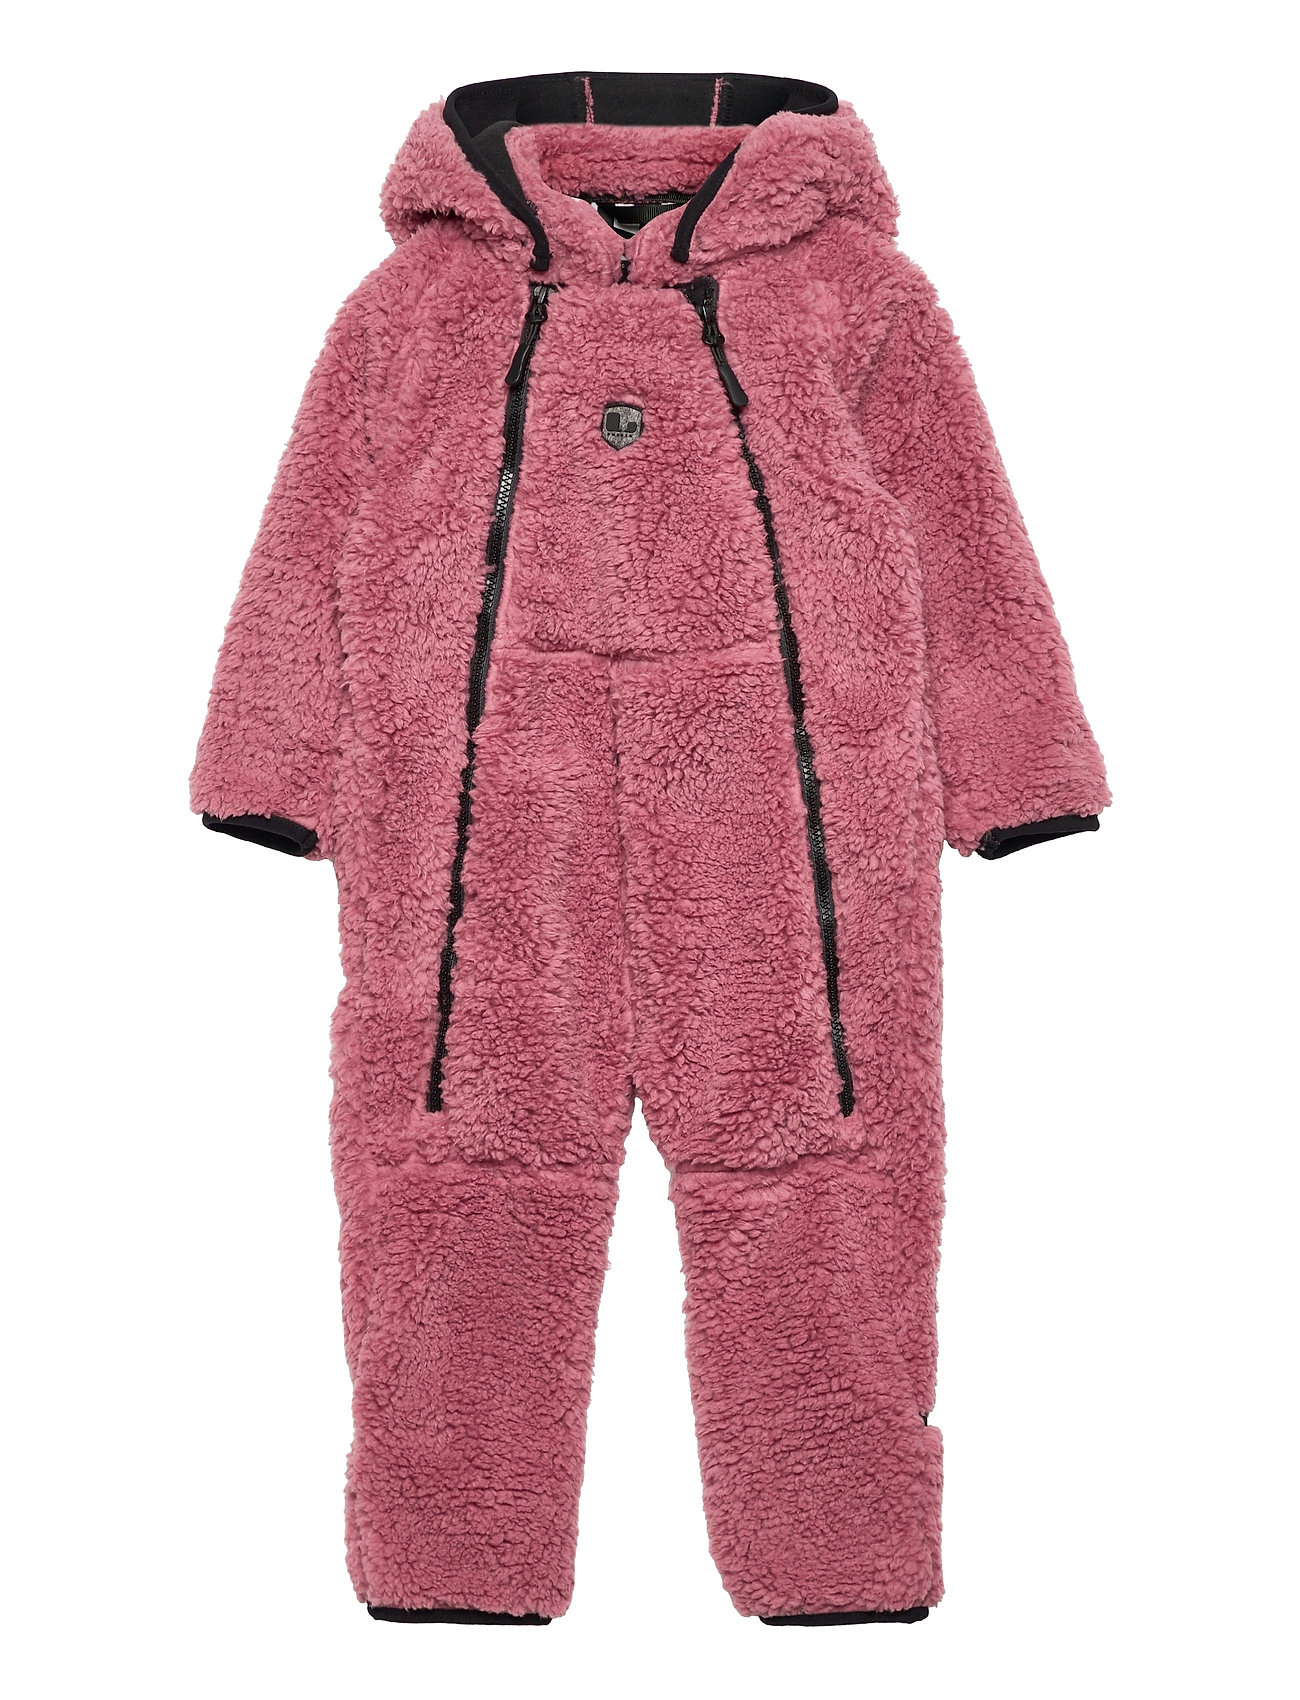 Muddus Pile Baby Overall Windfleece Outerwear Fleece Outerwear Fleece Suits Vaaleanpunainen Lindberg Sweden